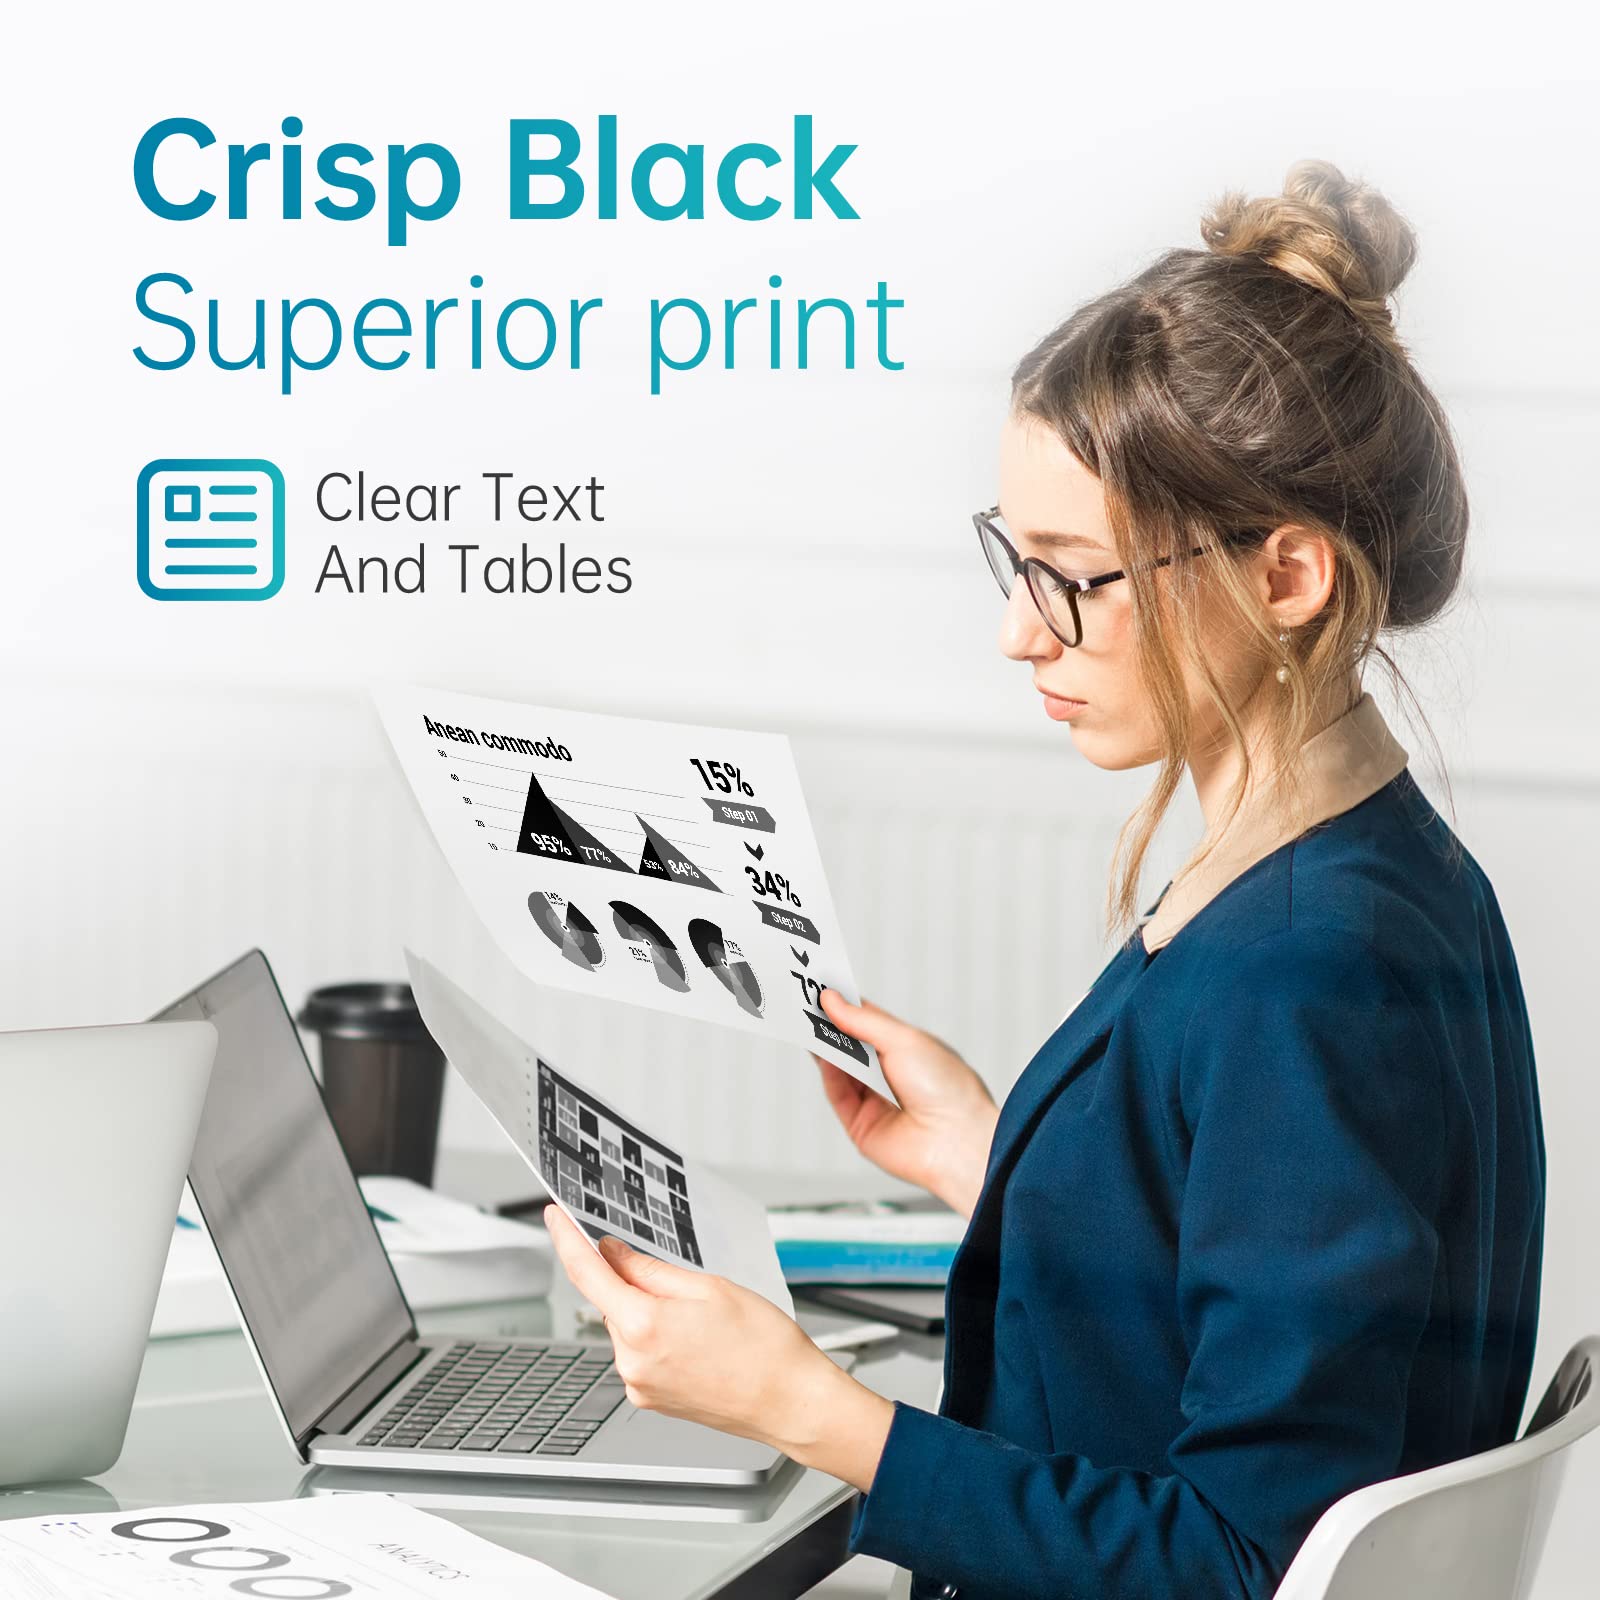 Crisp Black Superior Print: Professional woman reviewing a document printed with LEMERO HP 61XL ink cartridges, illustrating the superior quality of crisp black text and detailed graphics.